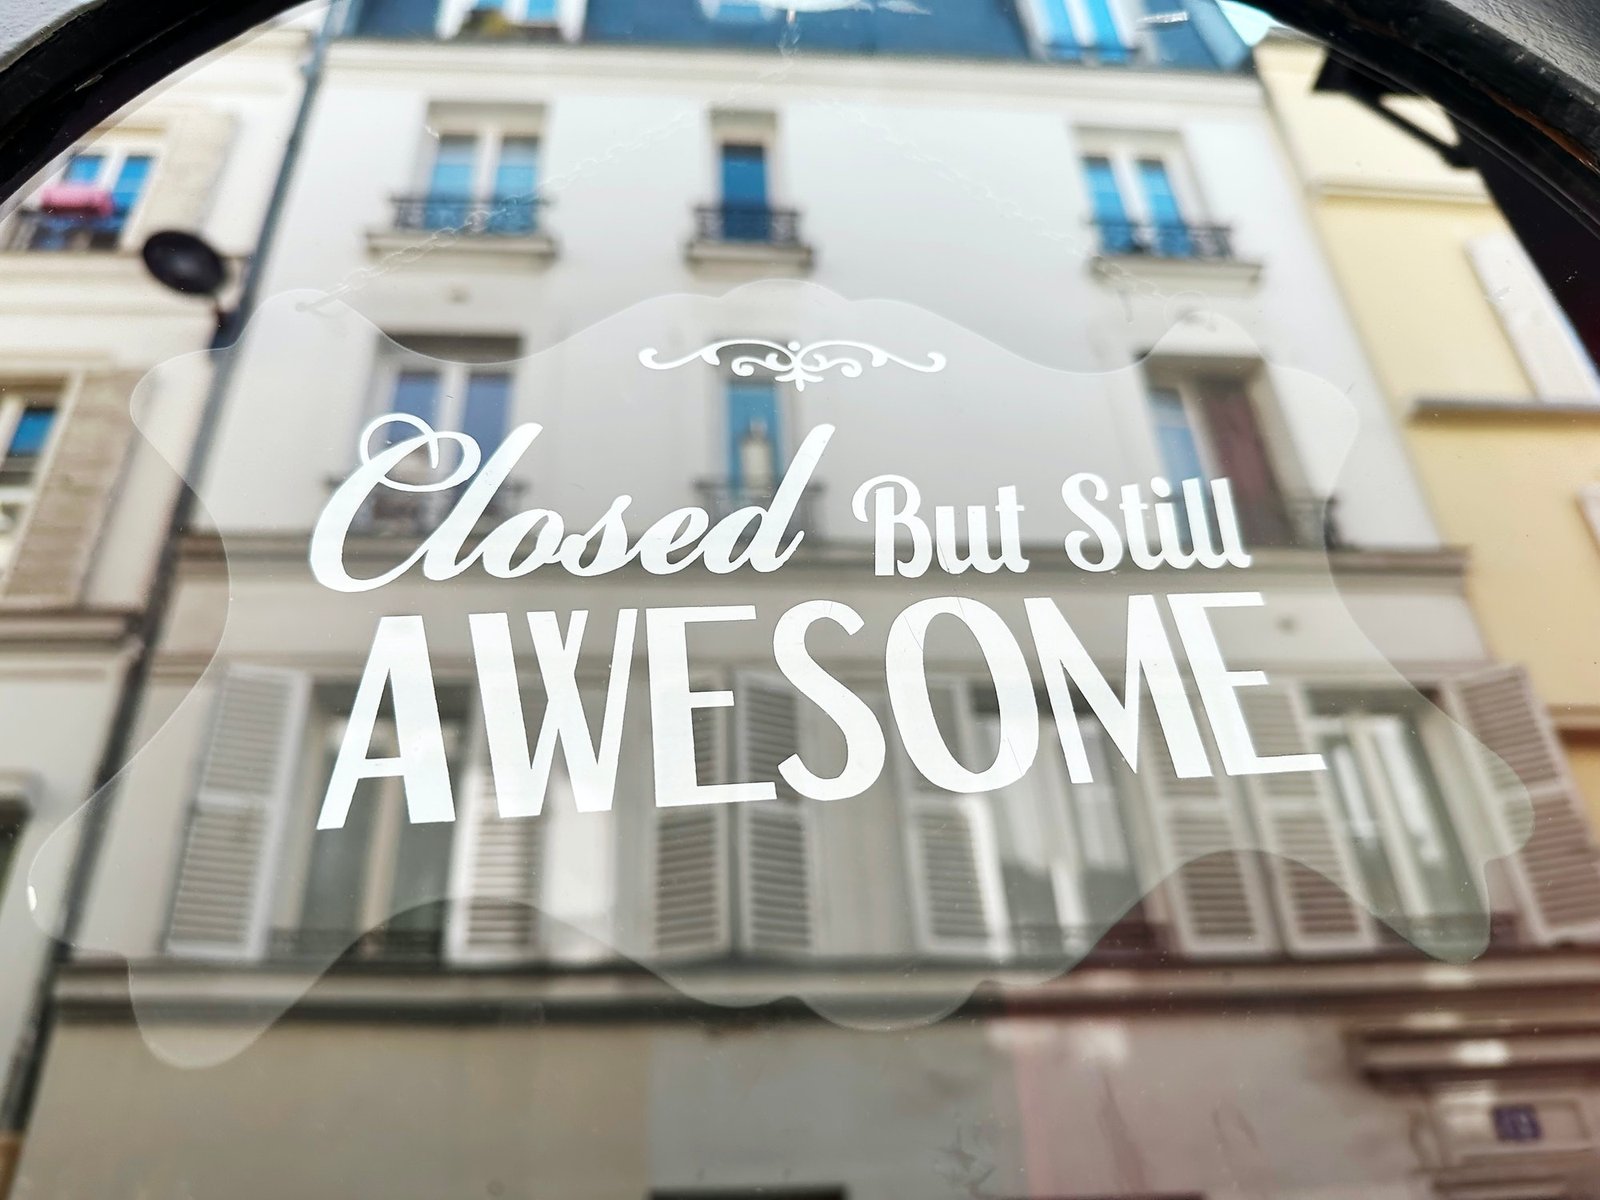 Phrase "Closed But Still Awesome" Written on Glass With Reflection of Local Architecture